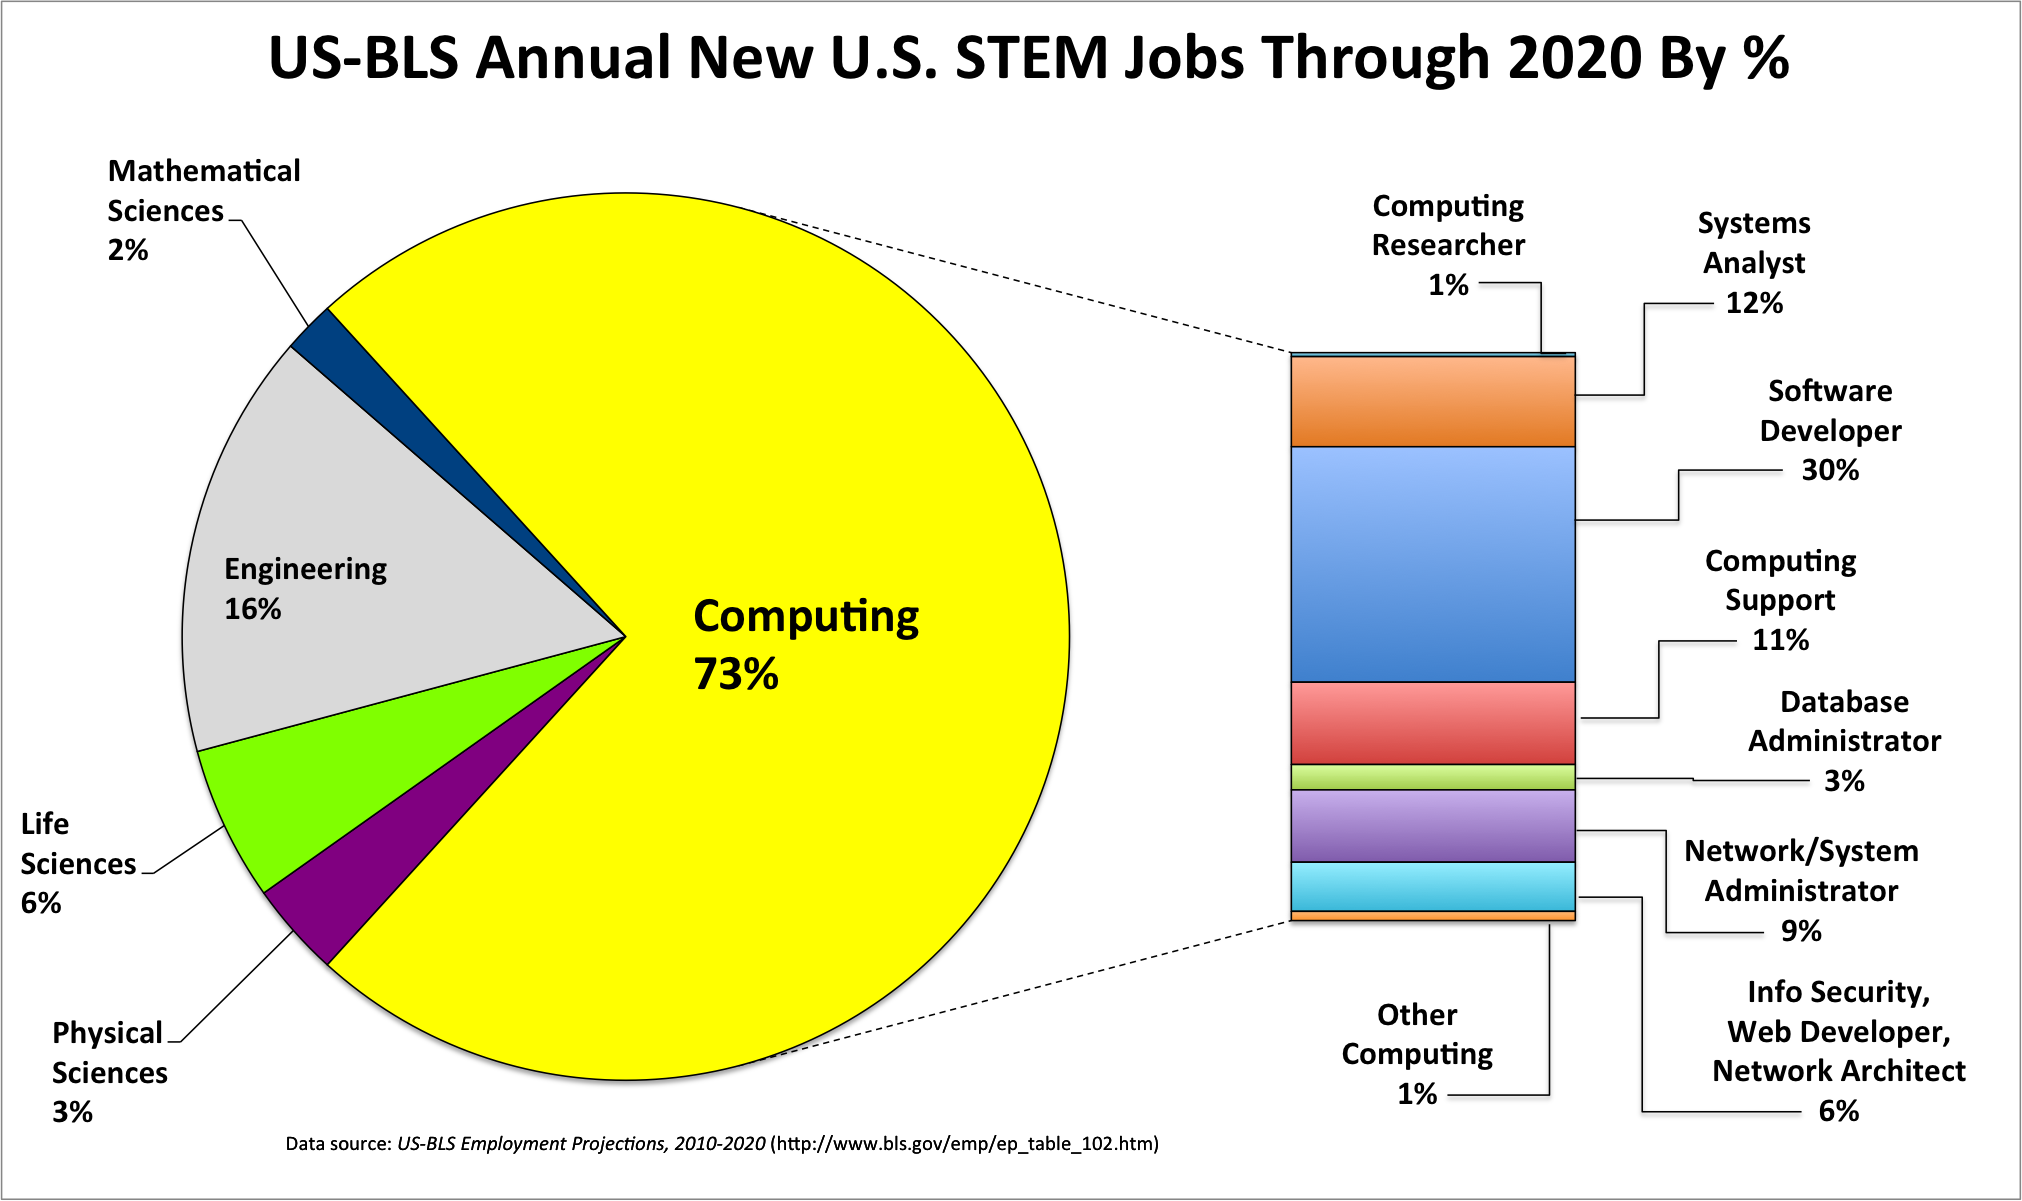 The U.S. Bureau of Labor predicts that between now and 2020, 
             73% of the new STEM jobs will be computing jobs